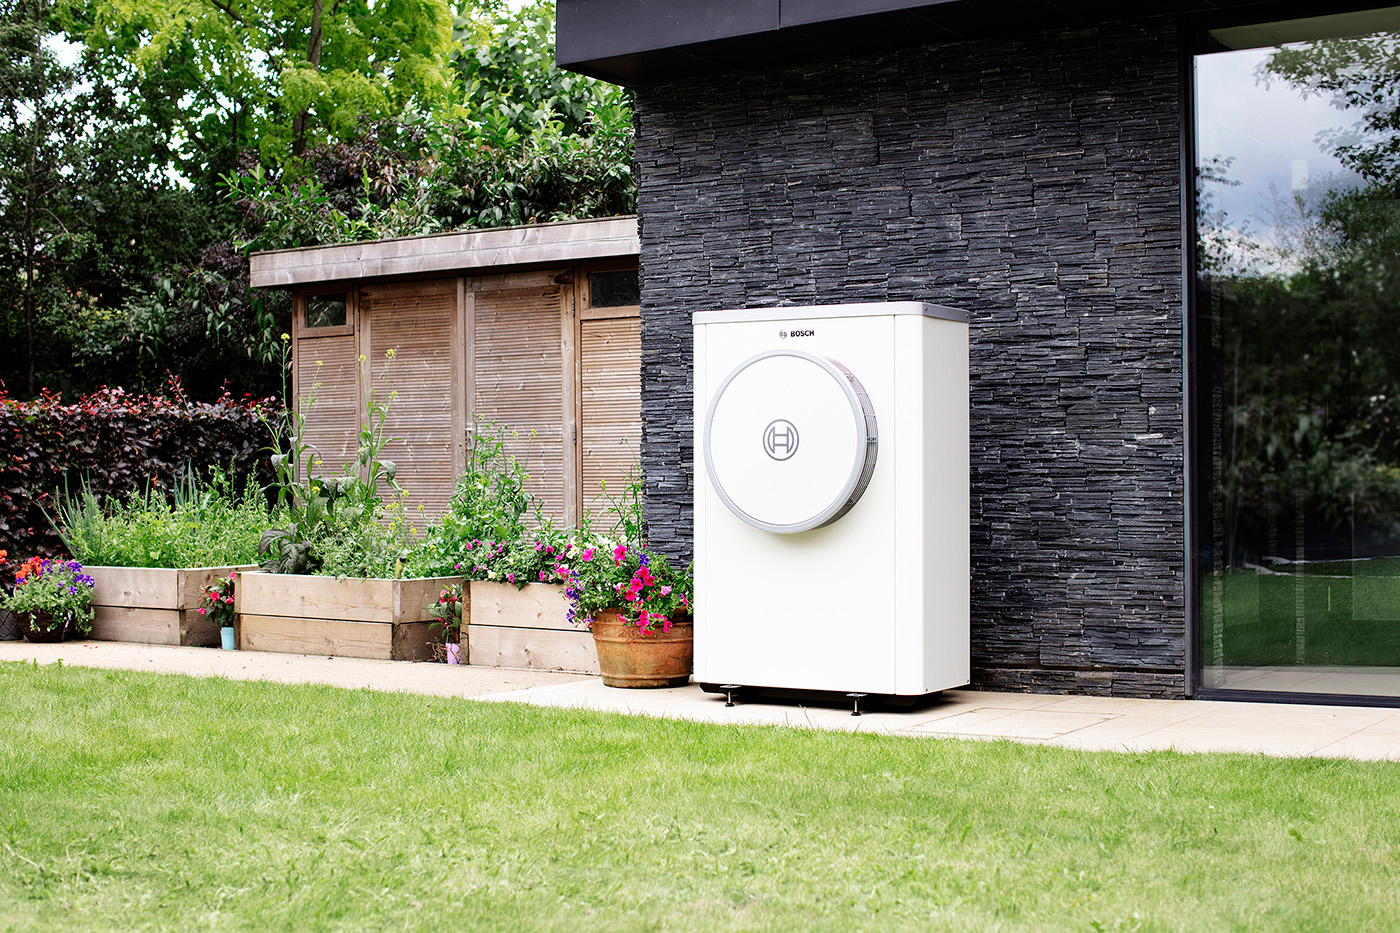 The Quiet Mark-certified 7400iAW is Worcester Bosch’s quietest outdoor heat pump unit, with ultra low-noise in operation enhanced by an additional diffuser